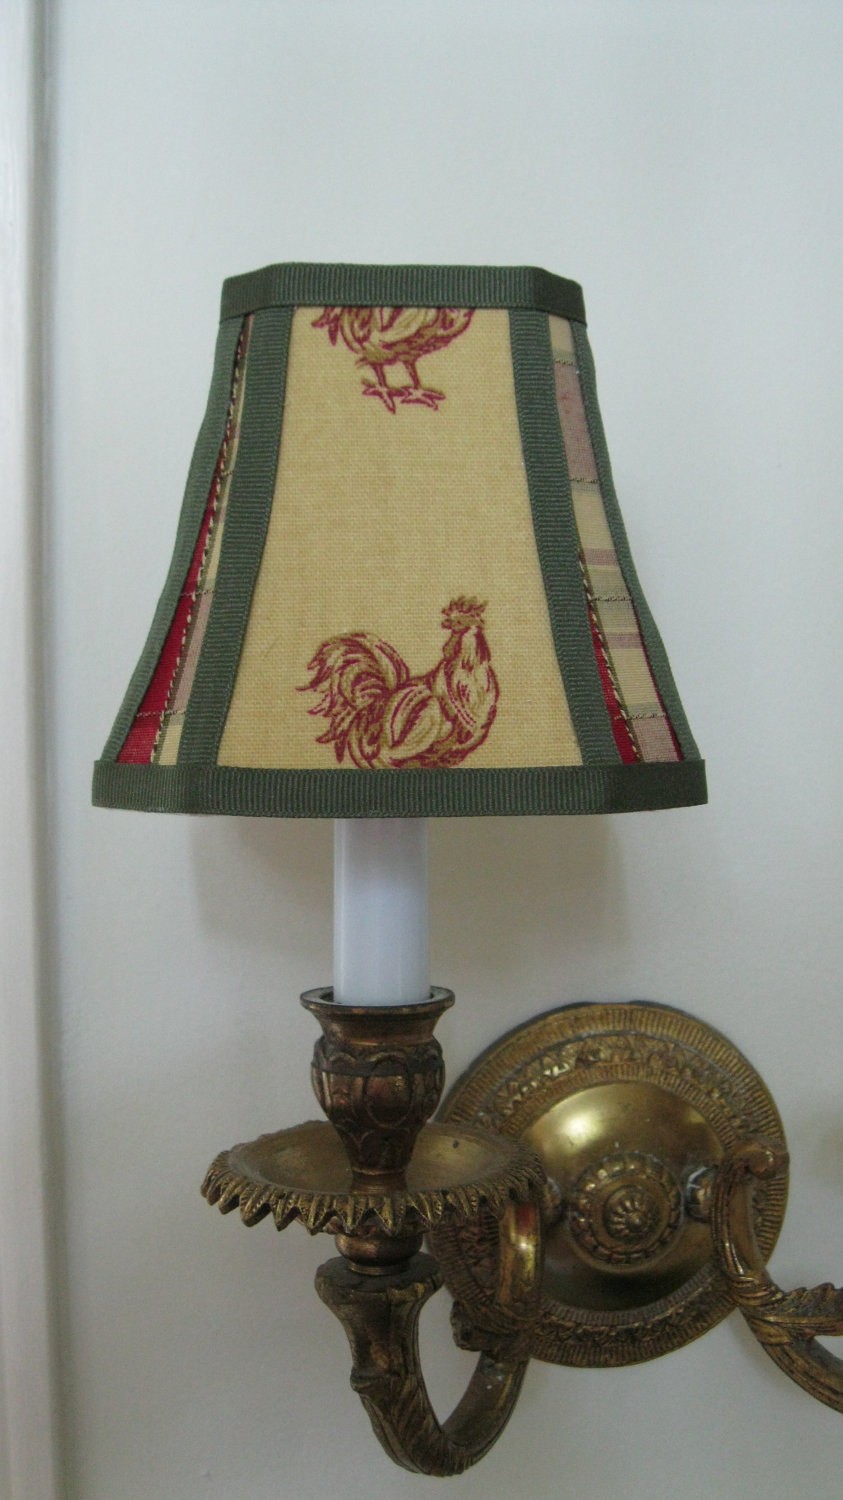 French country chandelier lamp shade in mustard yellow rooster fabric